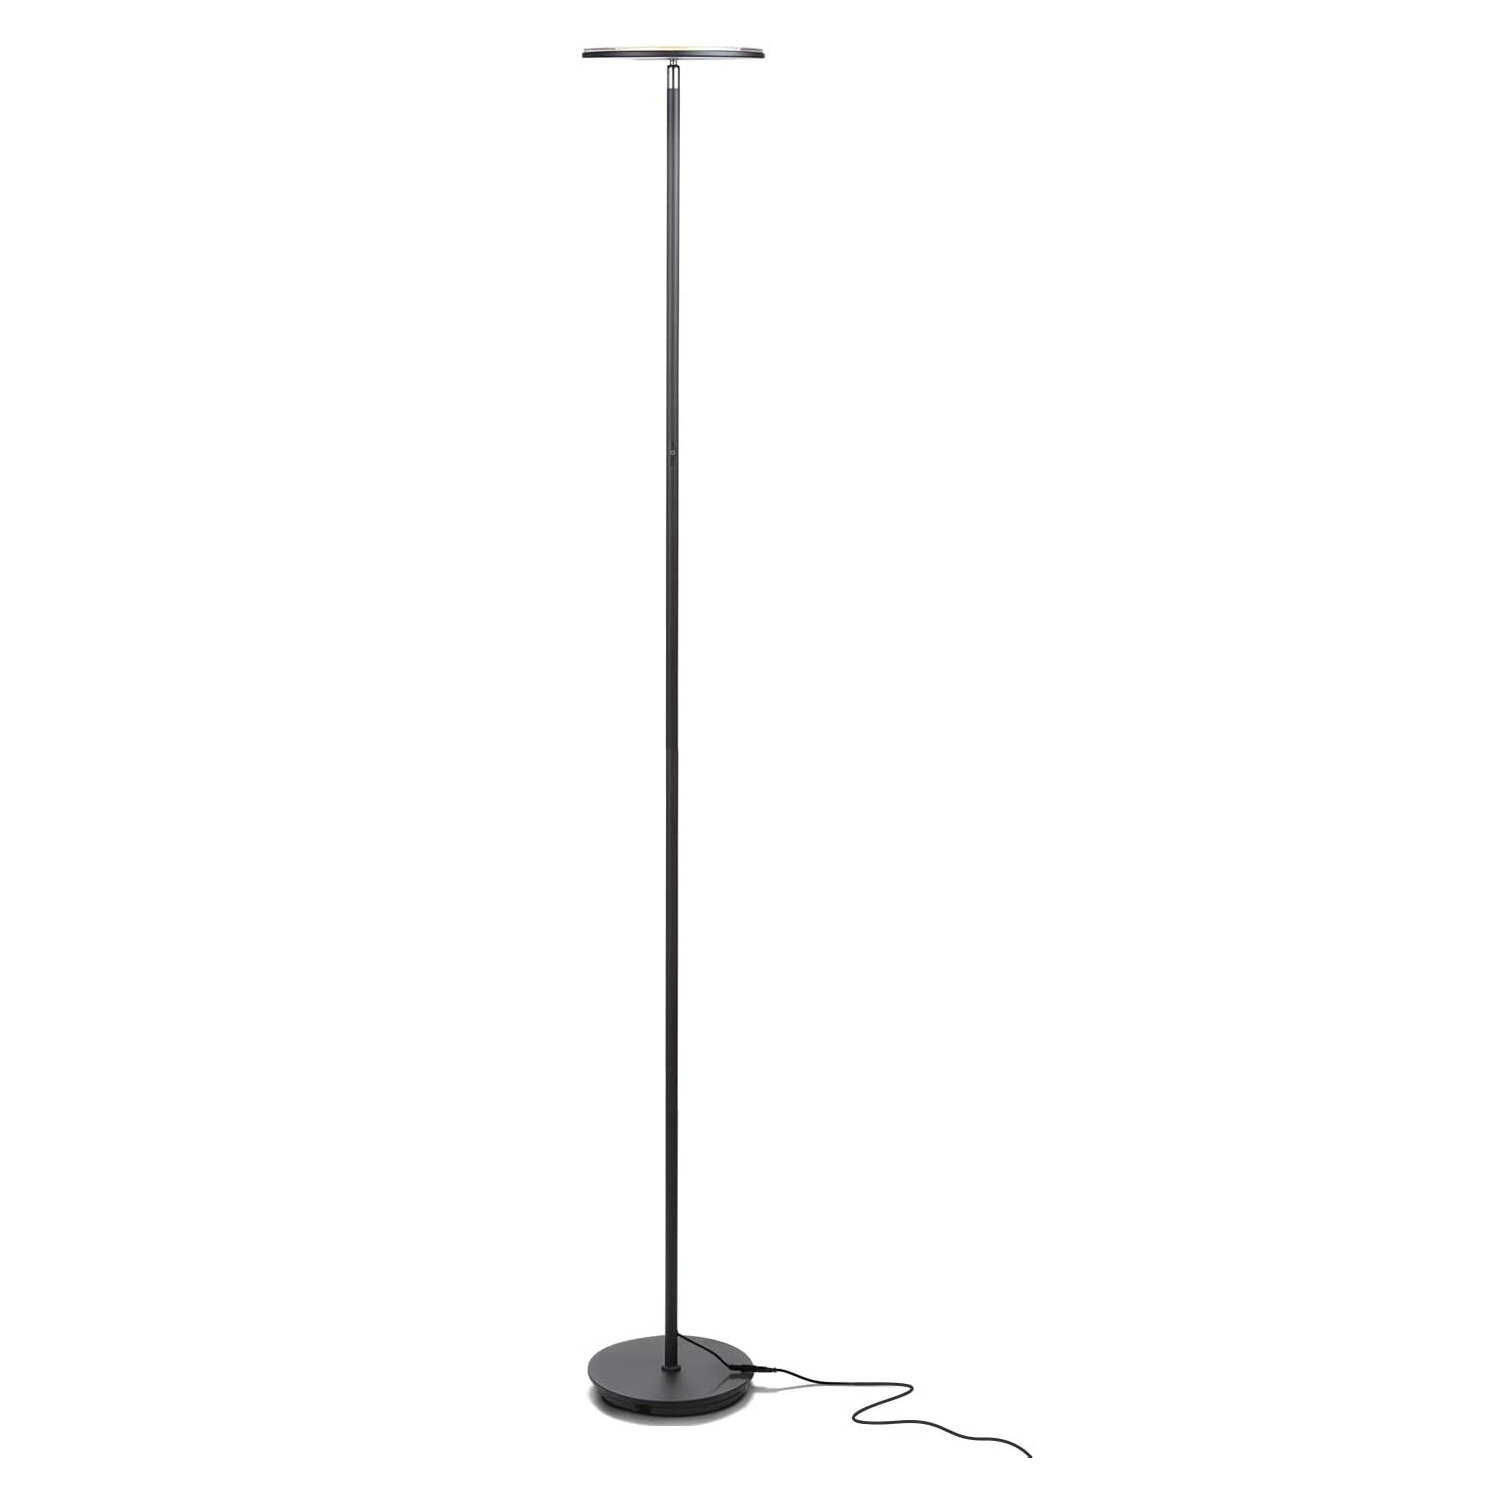 Black BT-FL-HALO-JT-BLCK Brightech Halo Flippable LED Torchiere Super Bright Floor Lamp Dimmable Uplight for Reading Books in Your Bedroom etc Tall Standing Modern Pole Light for Living Rooms & Offices 